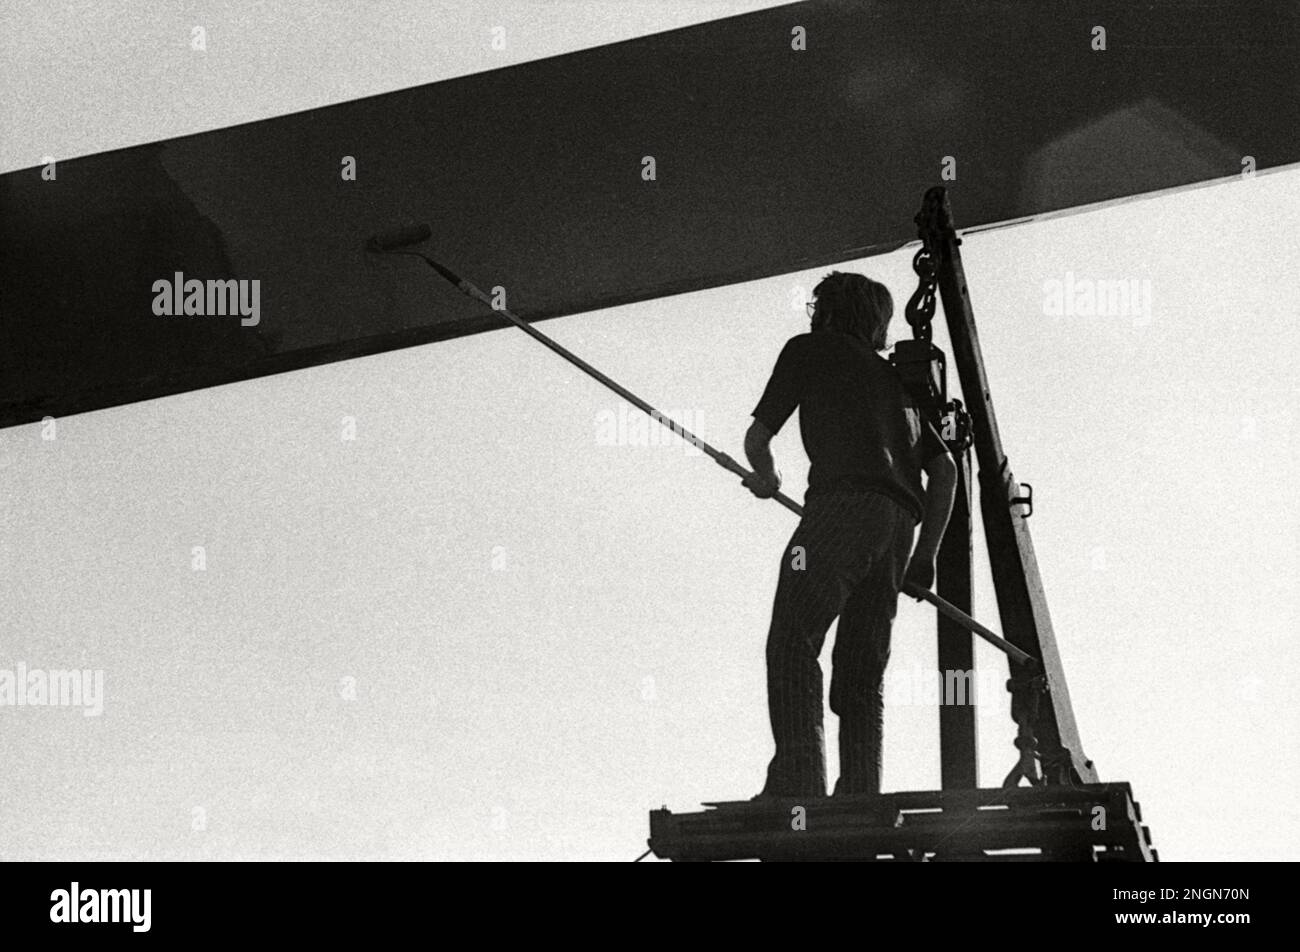 Construction workers on an outdoor site in 1971. Retro or vintage monochrome photograph Stock Photo